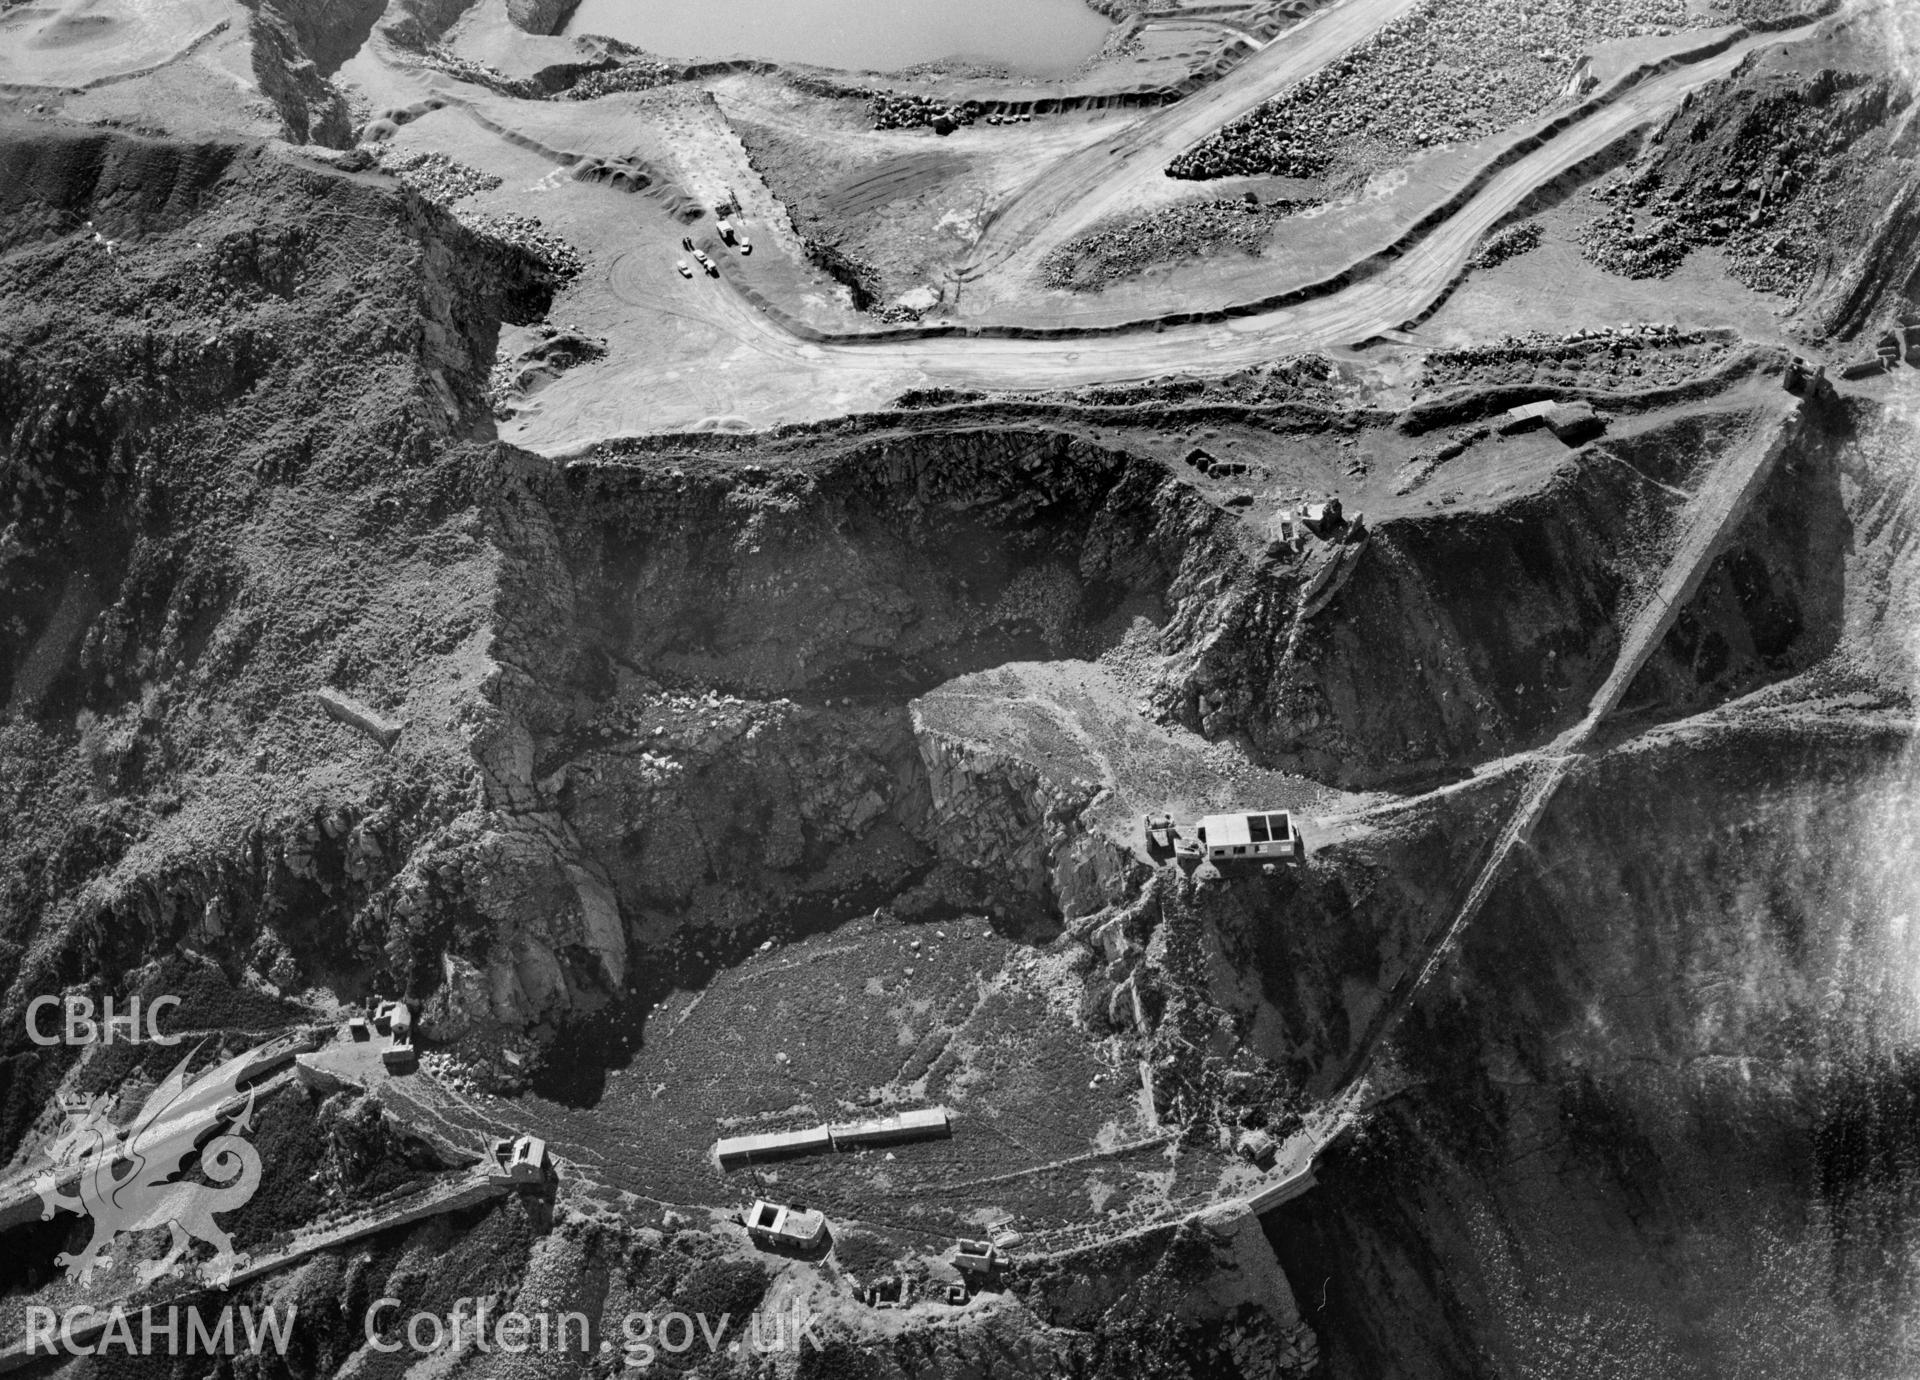 RCAHMW Black and white oblique aerial photograph of Penmaenmawr Stone Quarry, Penmaenmawr, taken on 18/04/1998 by Toby Driver